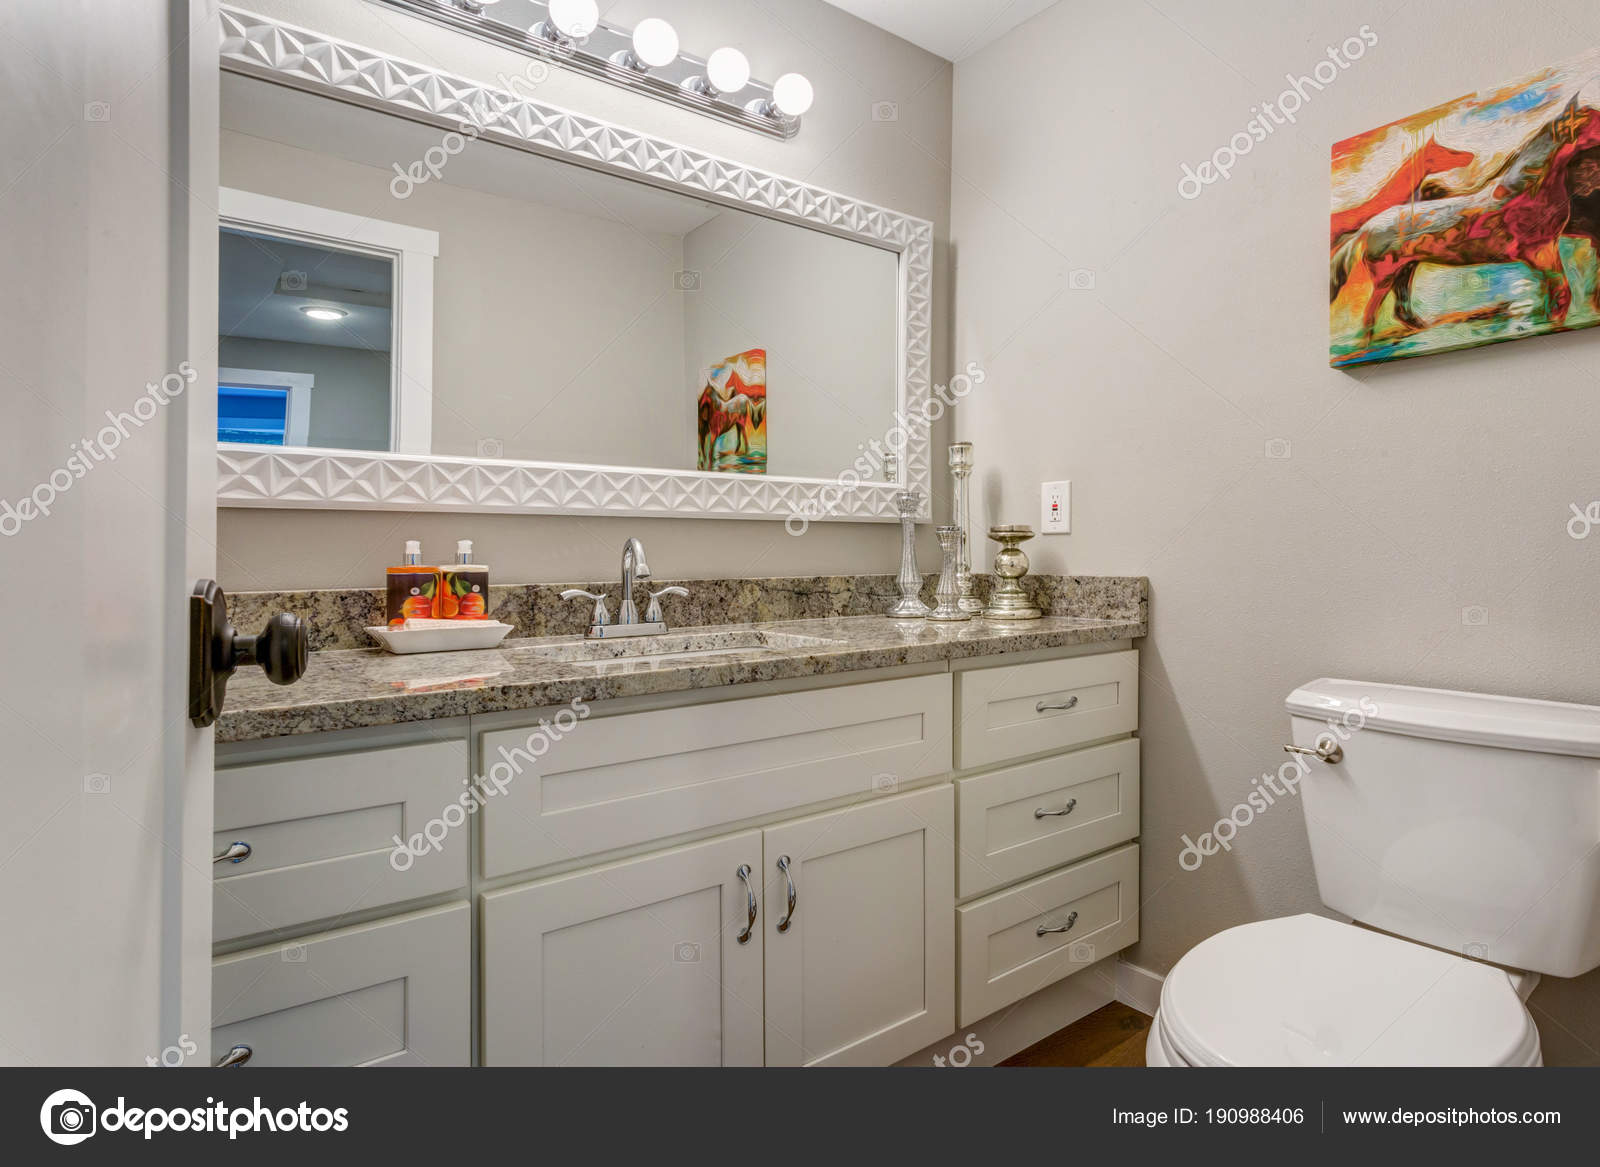 New Bathroom With A White Vanity Cabinet Stock Photo C Alabn